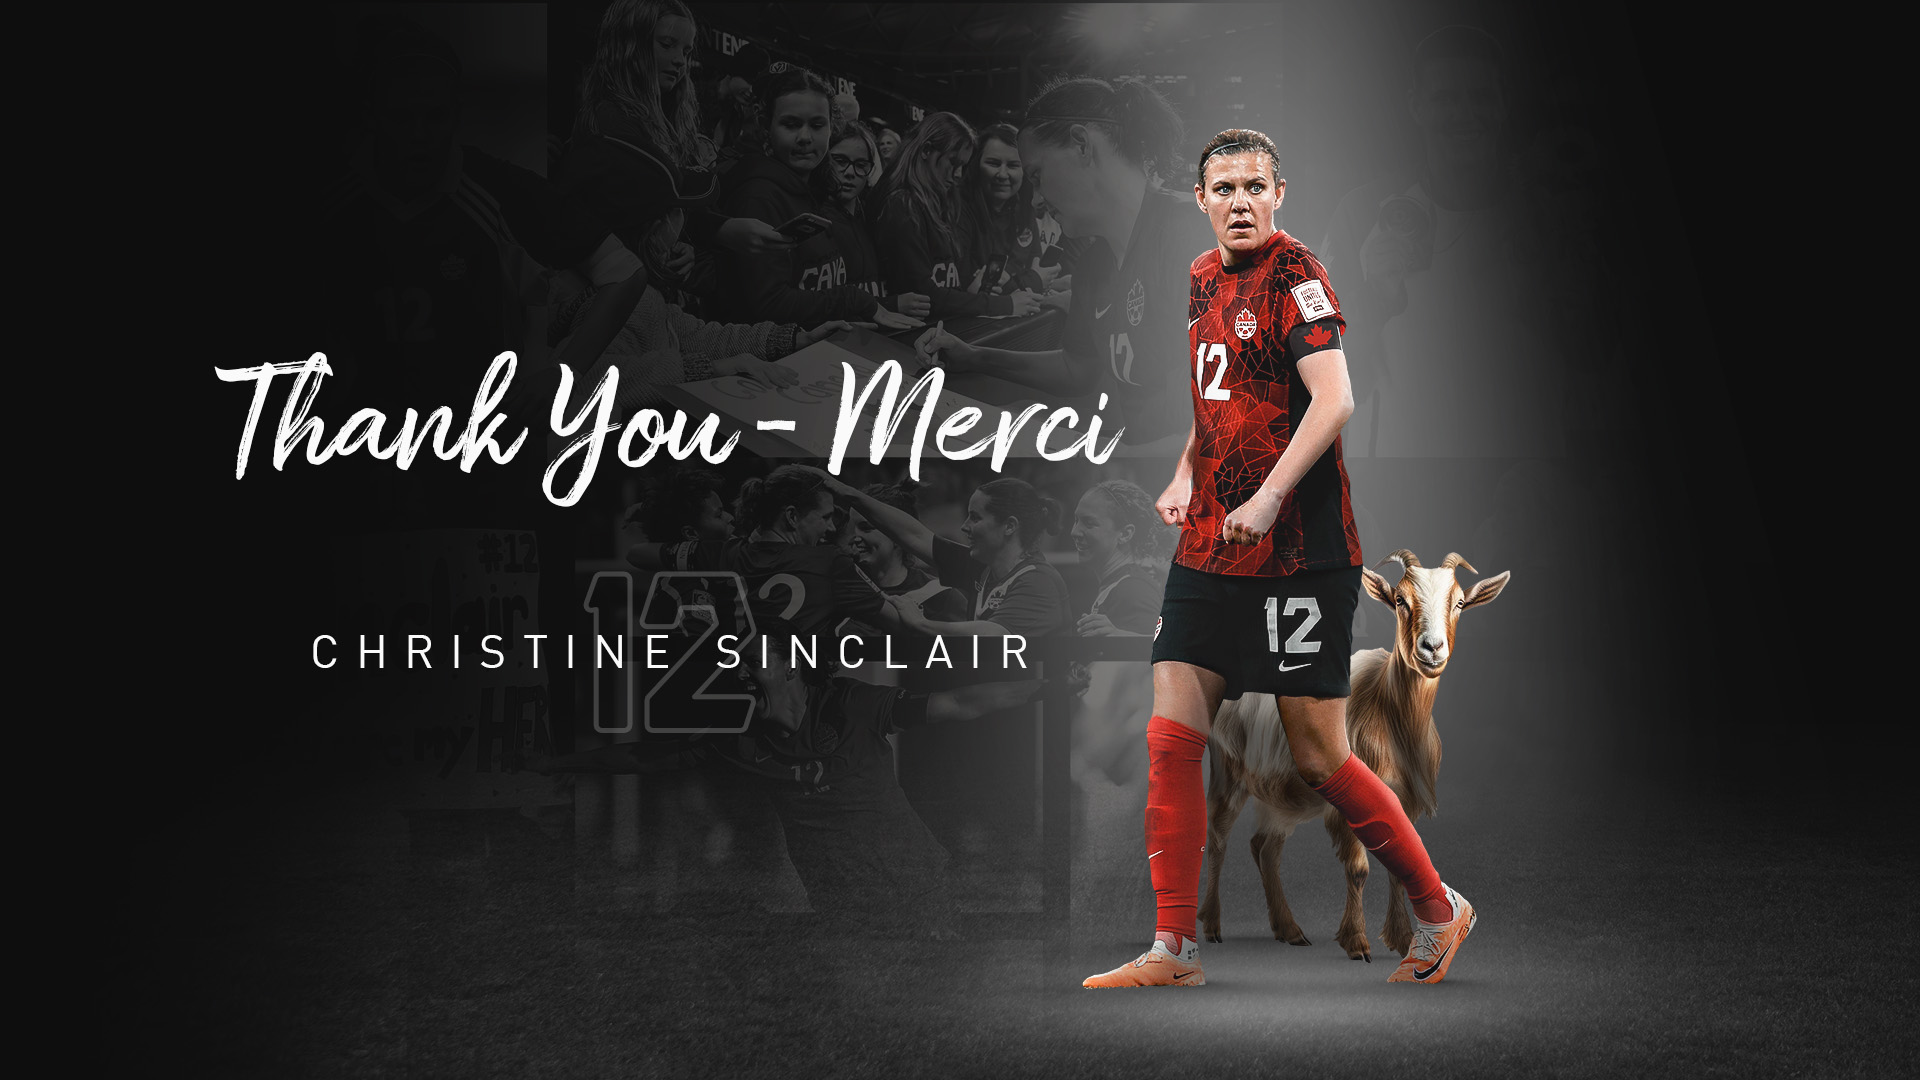 Christine Sinclair will leave the international scene at the end of 2023